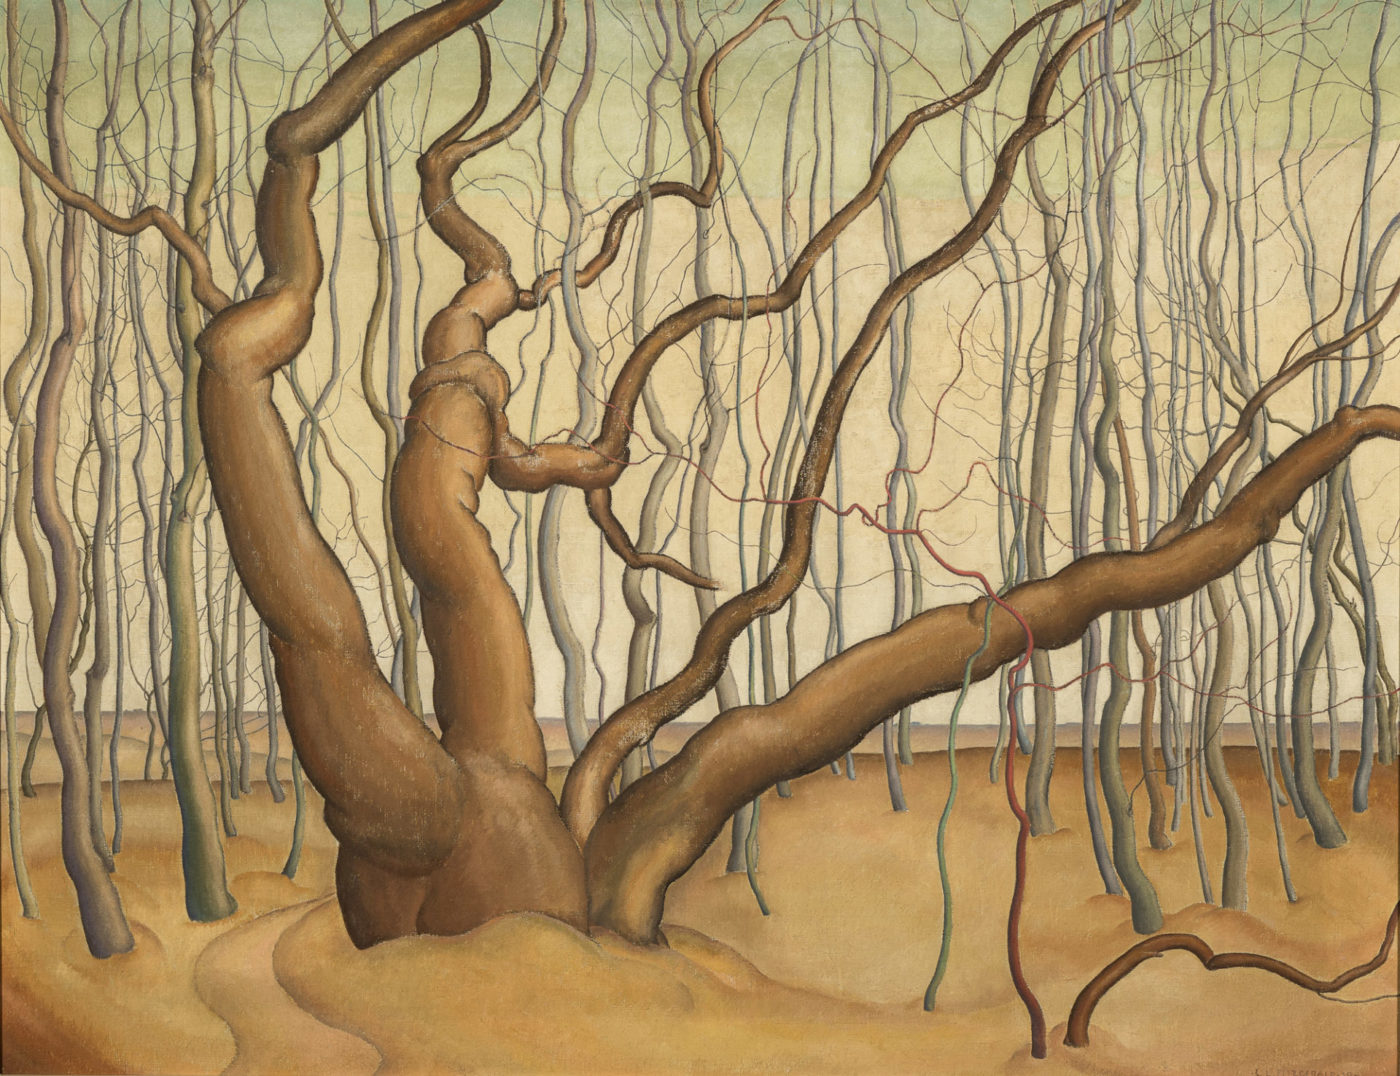 Lionel LeMoine FitzGerald. Poplar Woods (Poplars), 1929. oil on canvas, 71.8 x 91.5 cm. Collection of the Winnipeg Art Gallery; Acquired in memory of Mr. and Mrs. Arnold O. Brigden, G-75-66.